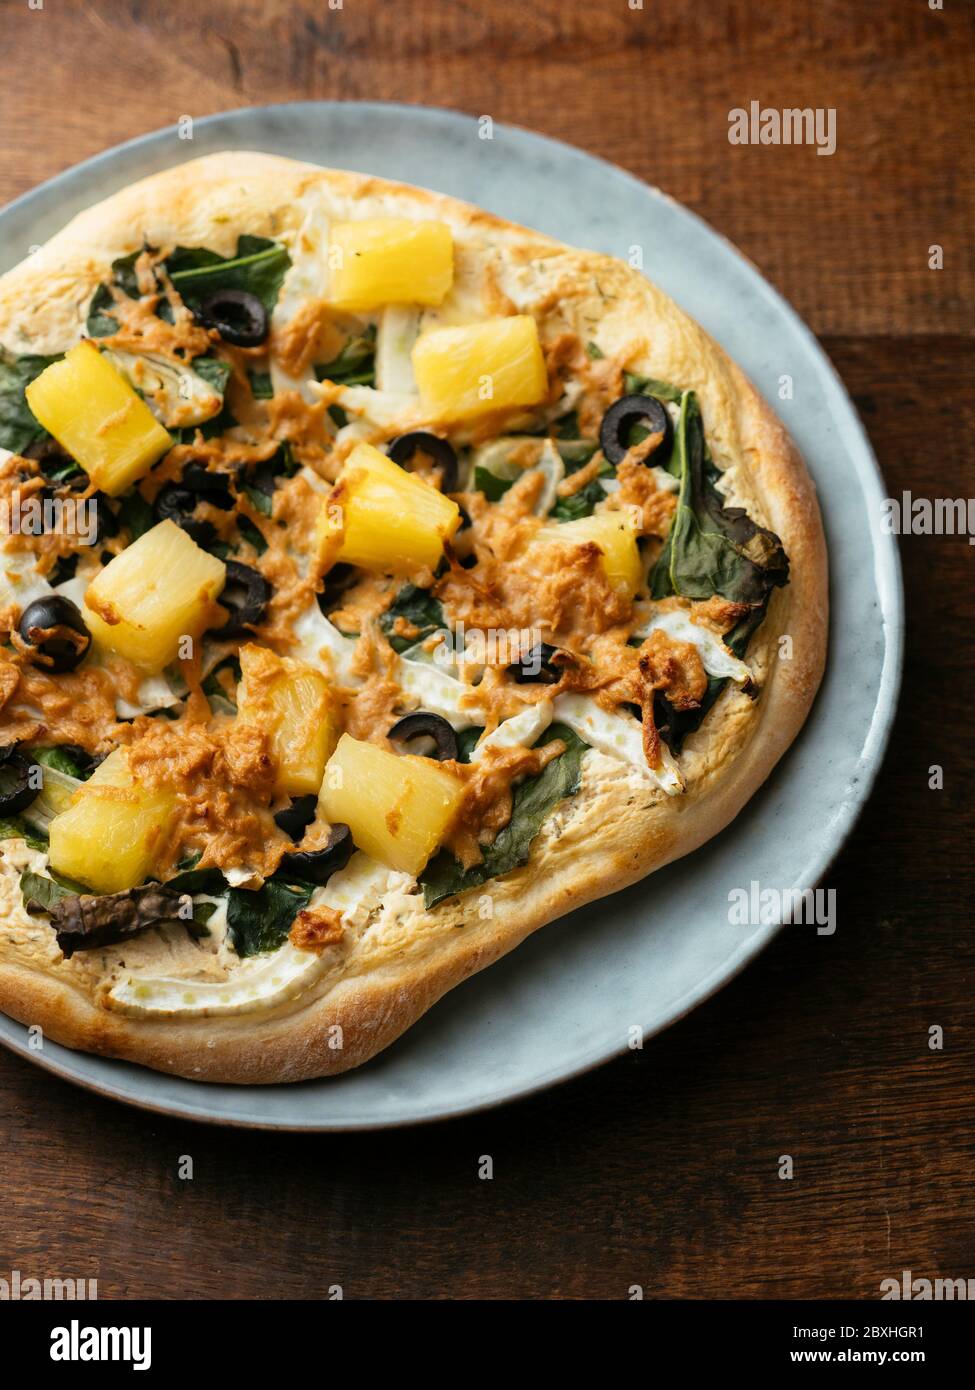 Home made vegan Siberian kale pizza with pineapple and fennel. Stock Photo